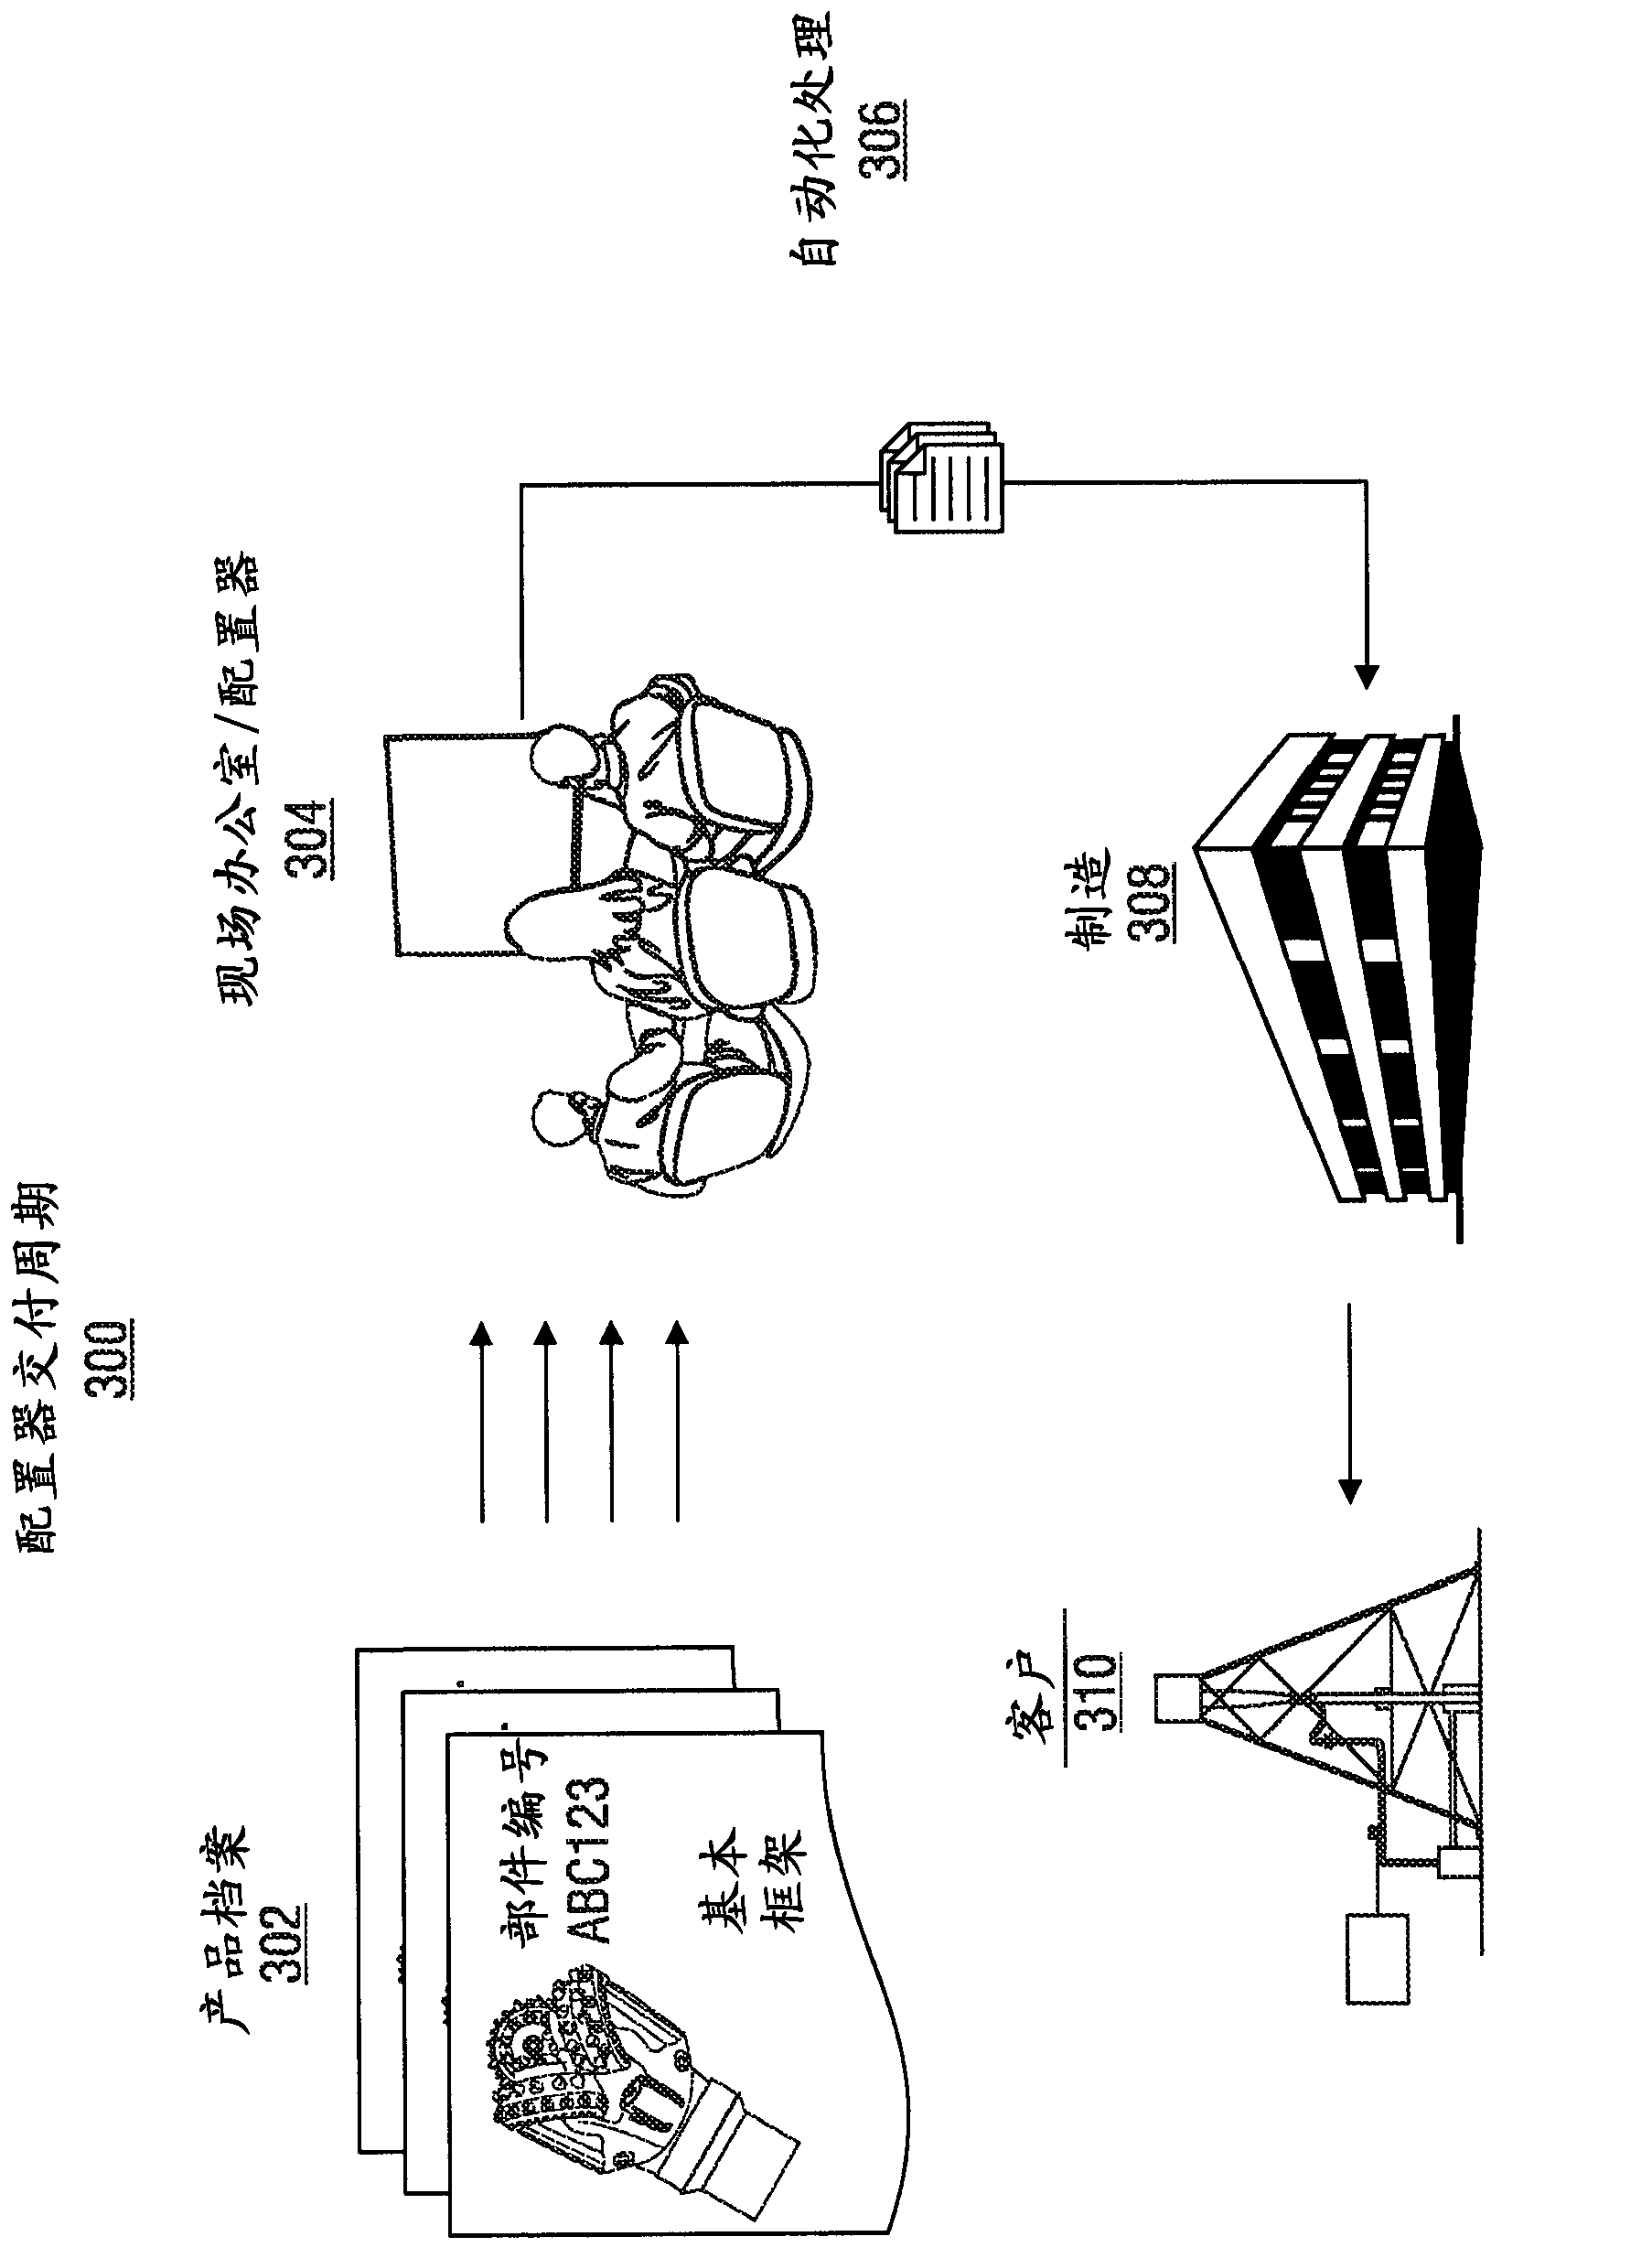 Method and apparatus for efficient implementation of design changes